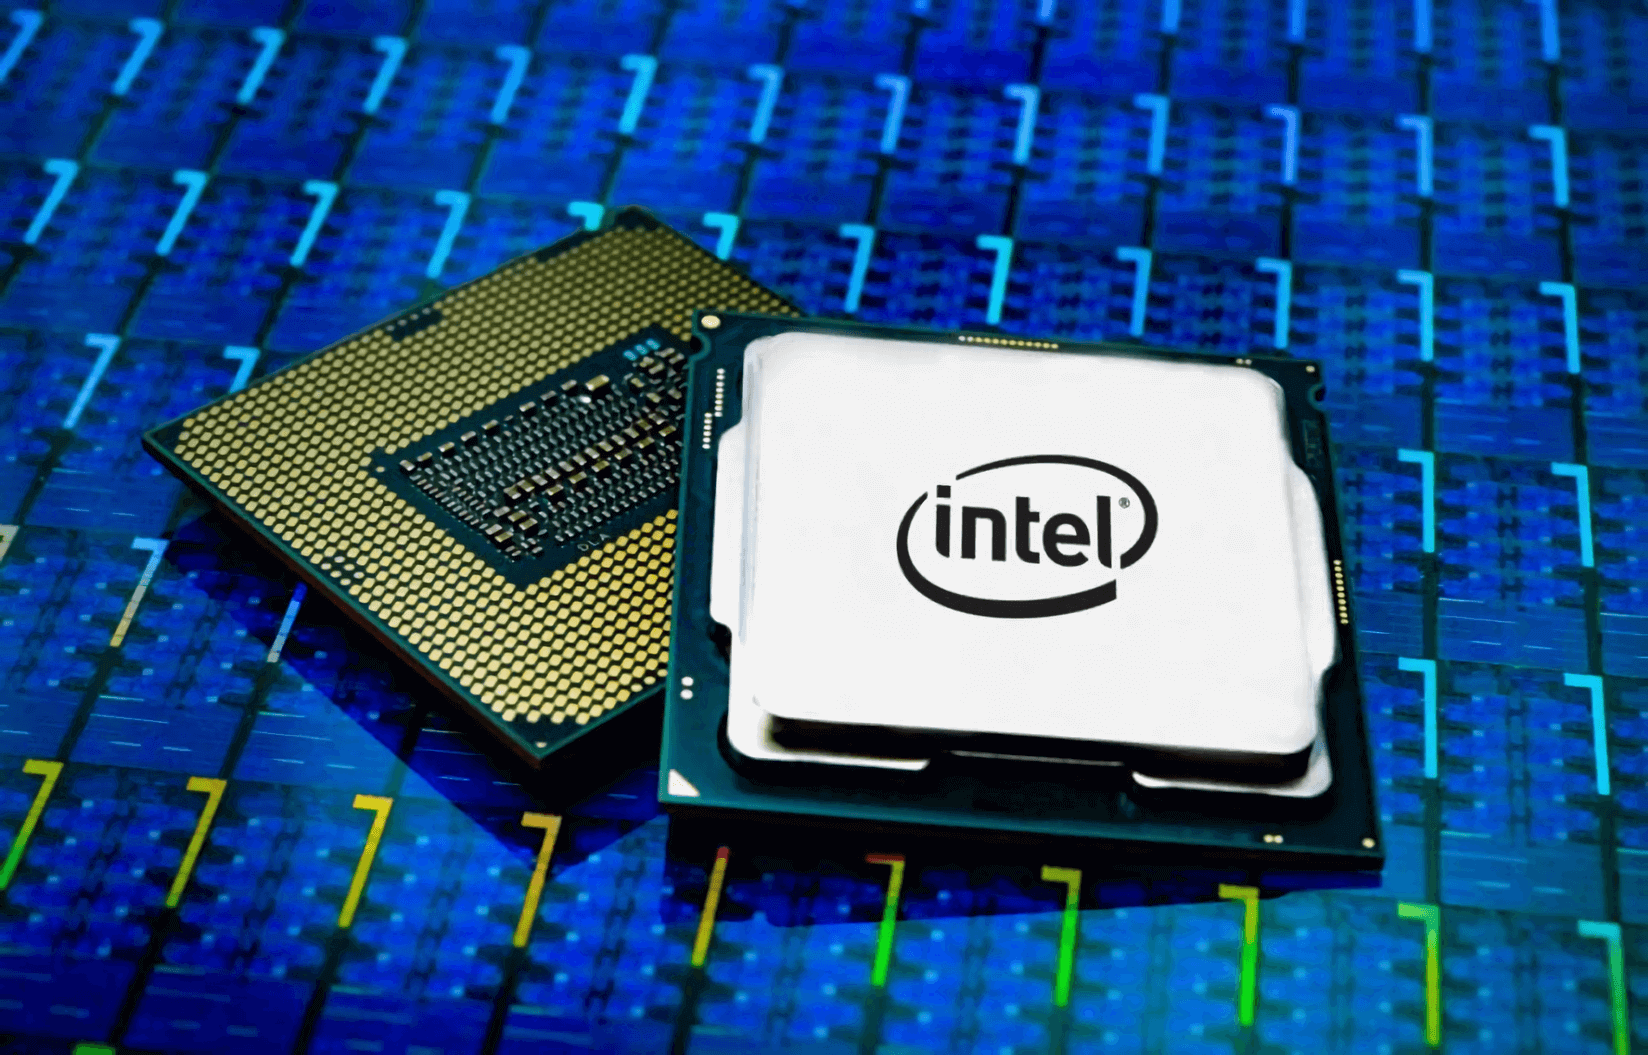 Intel's Core i9-12900K Alder Lake chips are already on sale in China